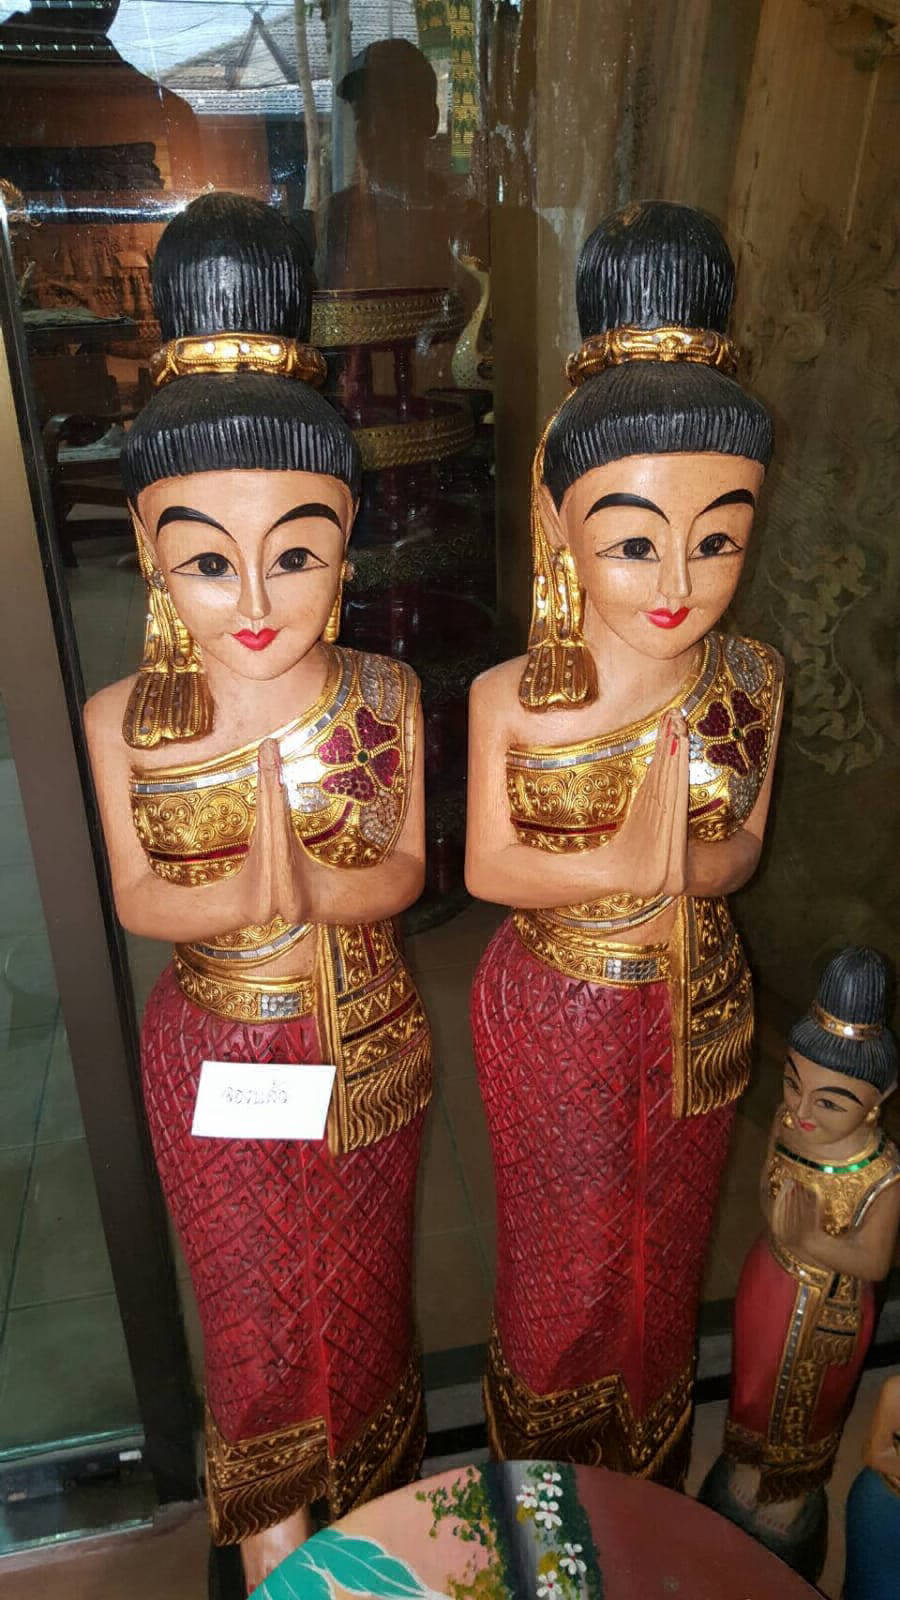 Large hand painted wooden Statues